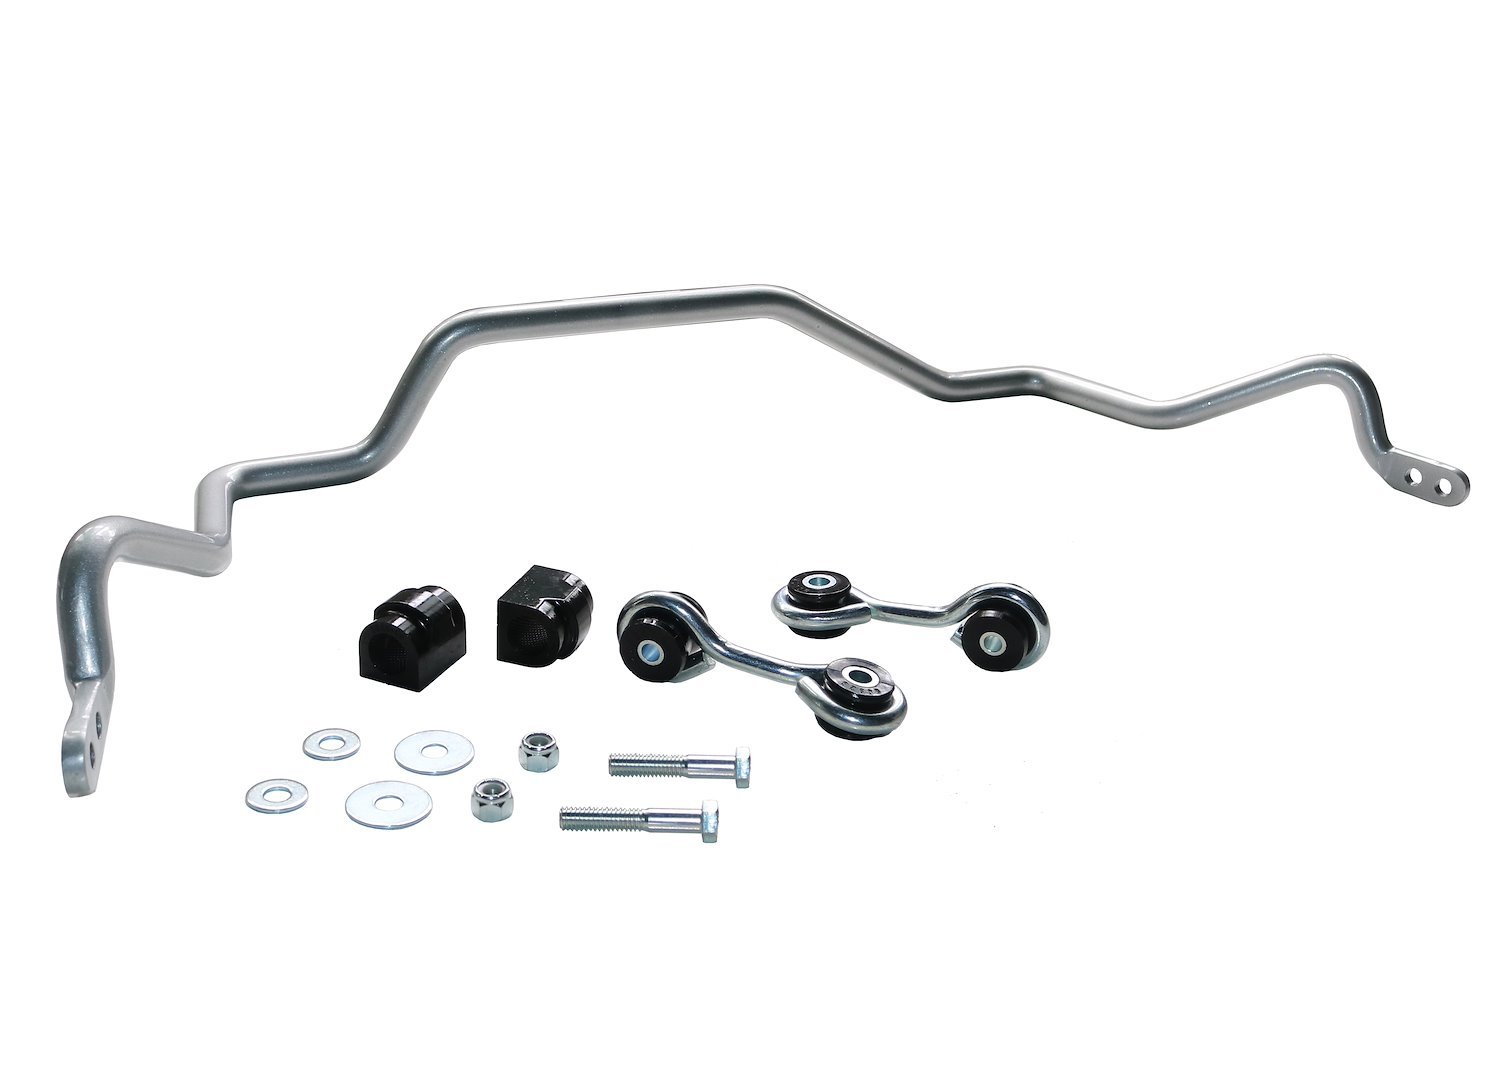 BBR11Z Rear 20 mm Heavy Duty Adjustable Sway Bar for 1999-2005 BMW 3 Series E46 (Excl. M3)